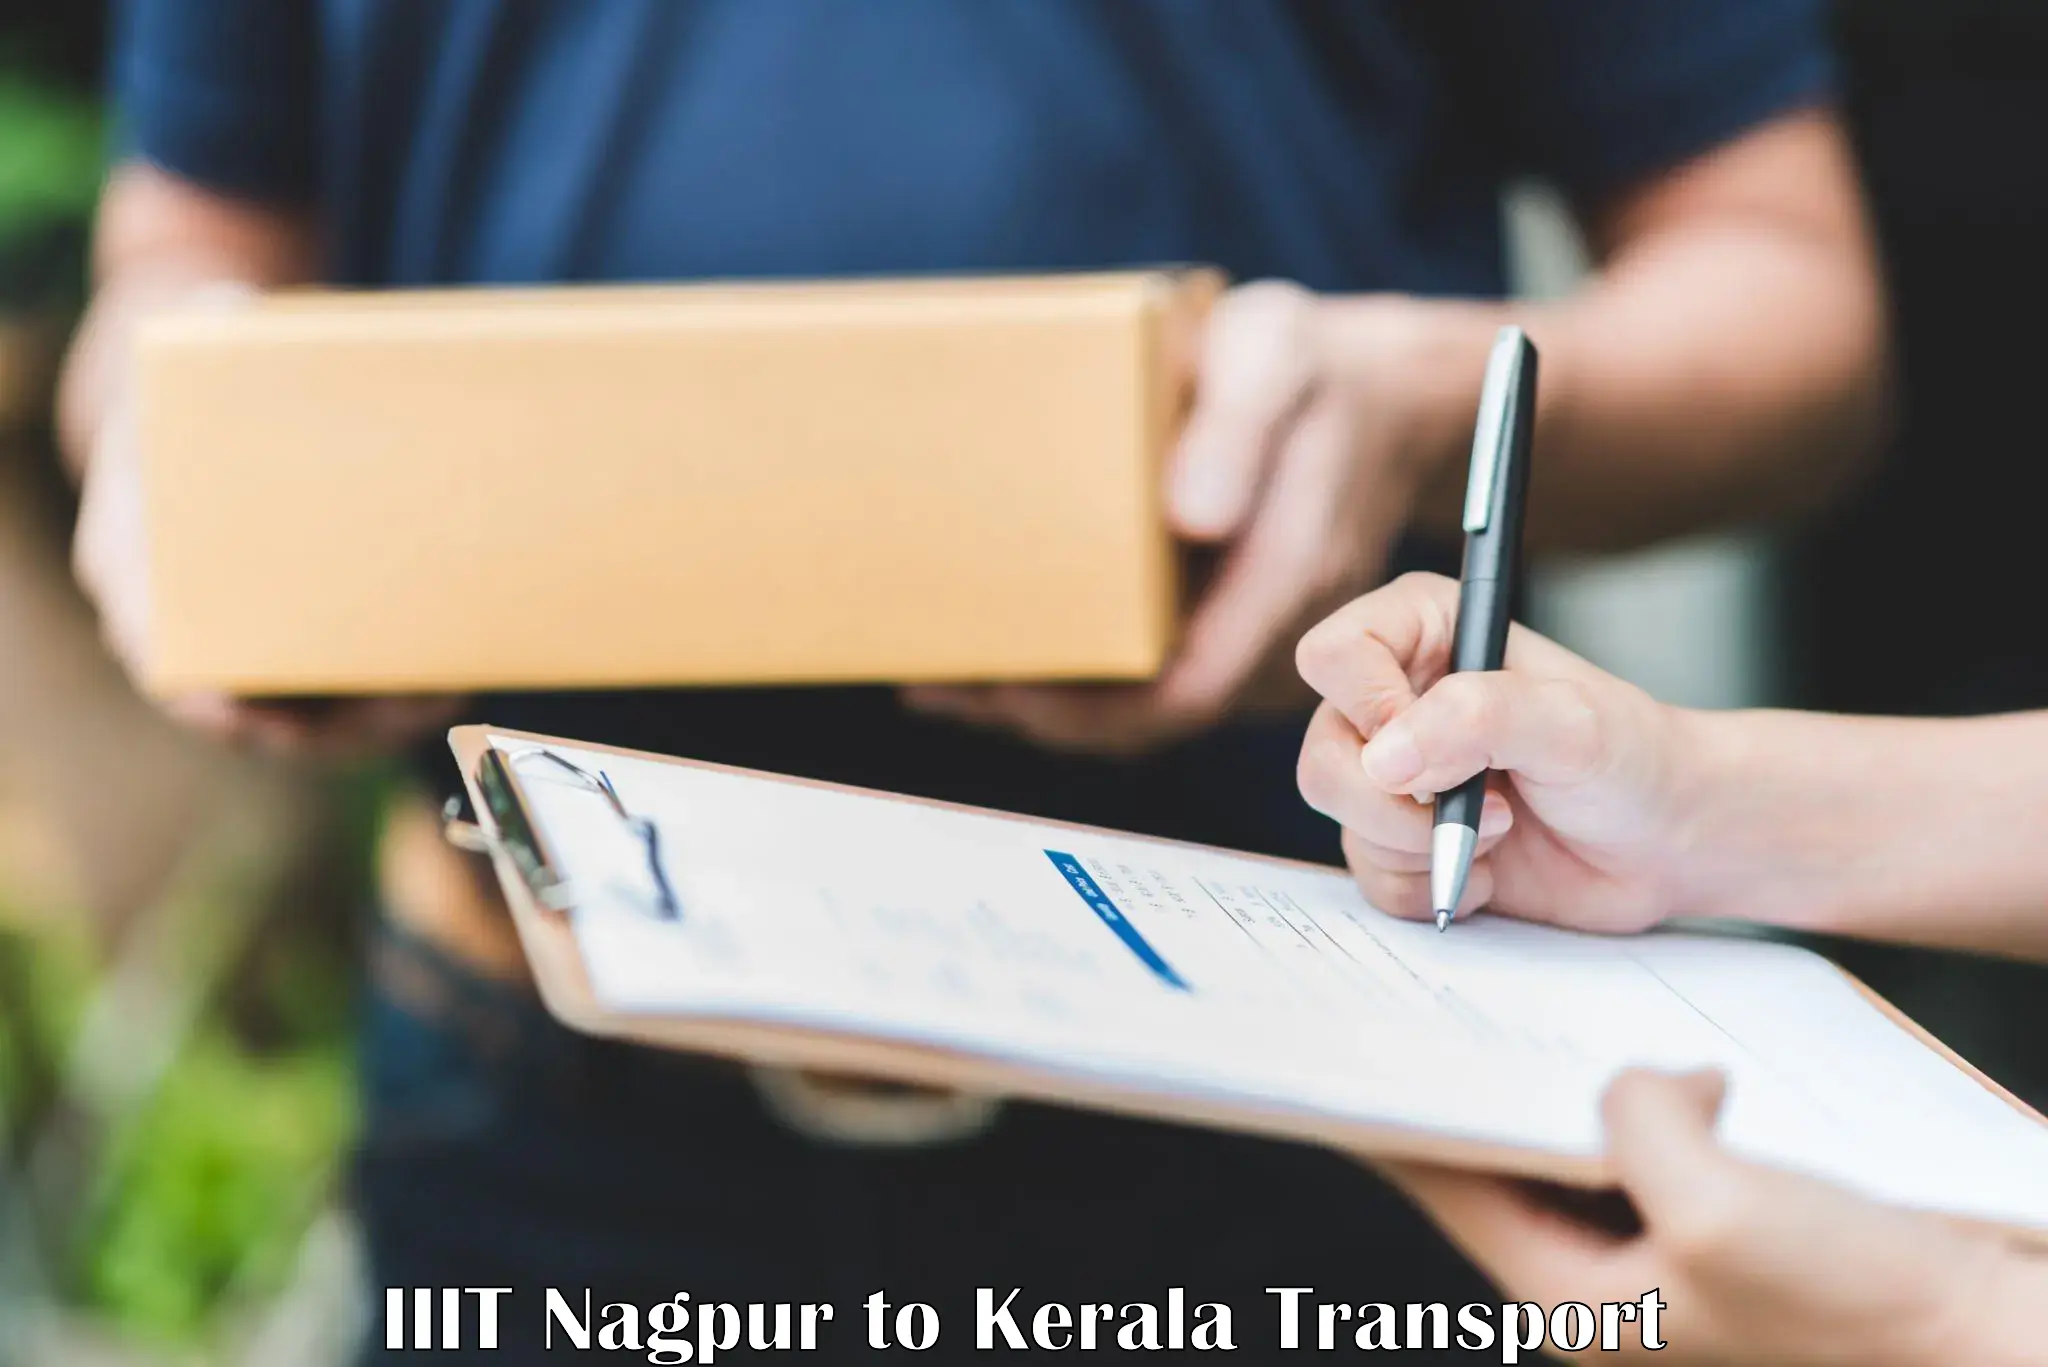 Nearby transport service in IIIT Nagpur to Kochi